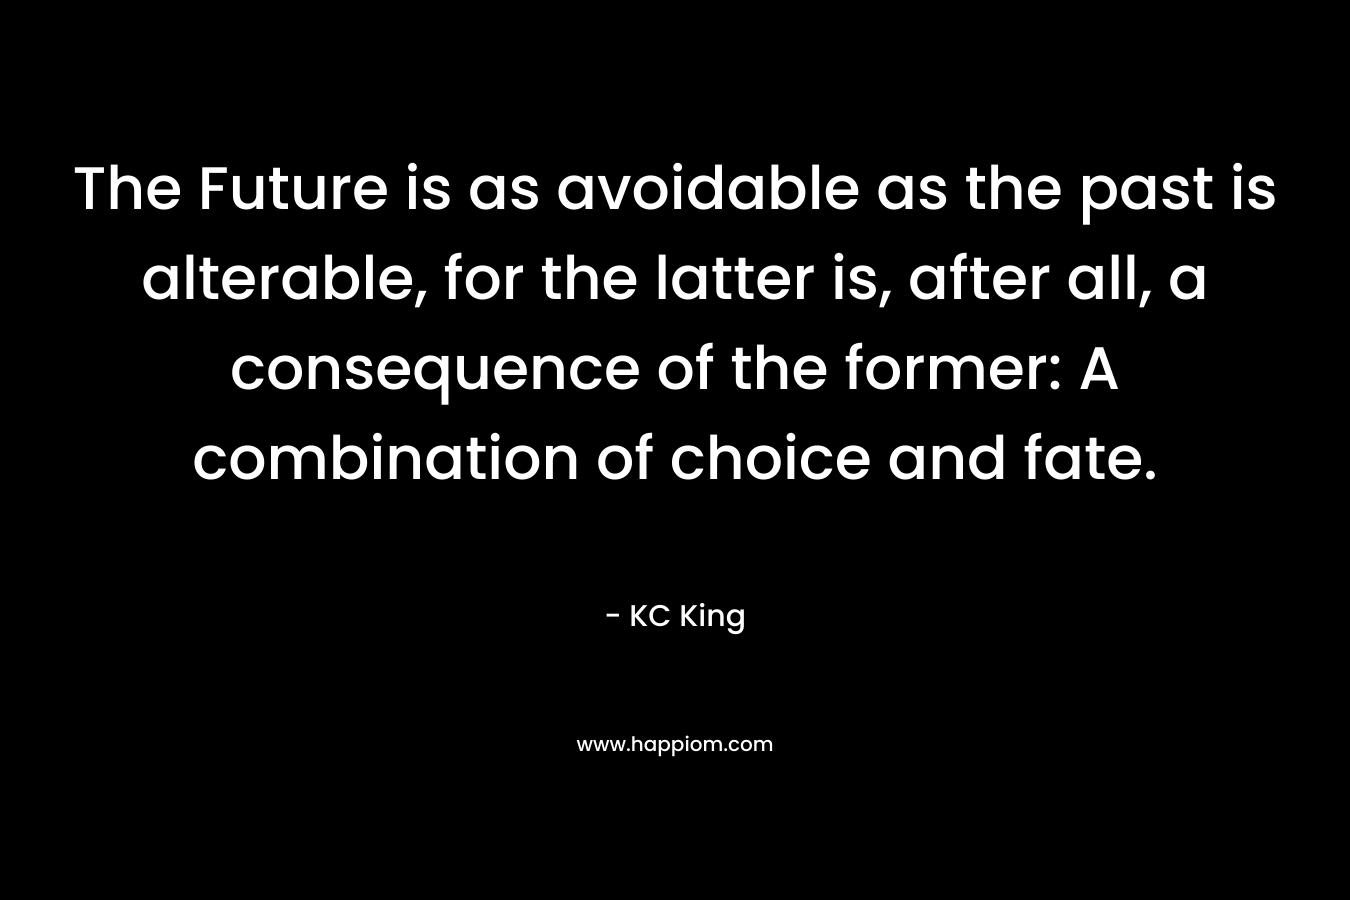 The Future is as avoidable as the past is alterable, for the latter is, after all, a consequence of the former: A combination of choice and fate.